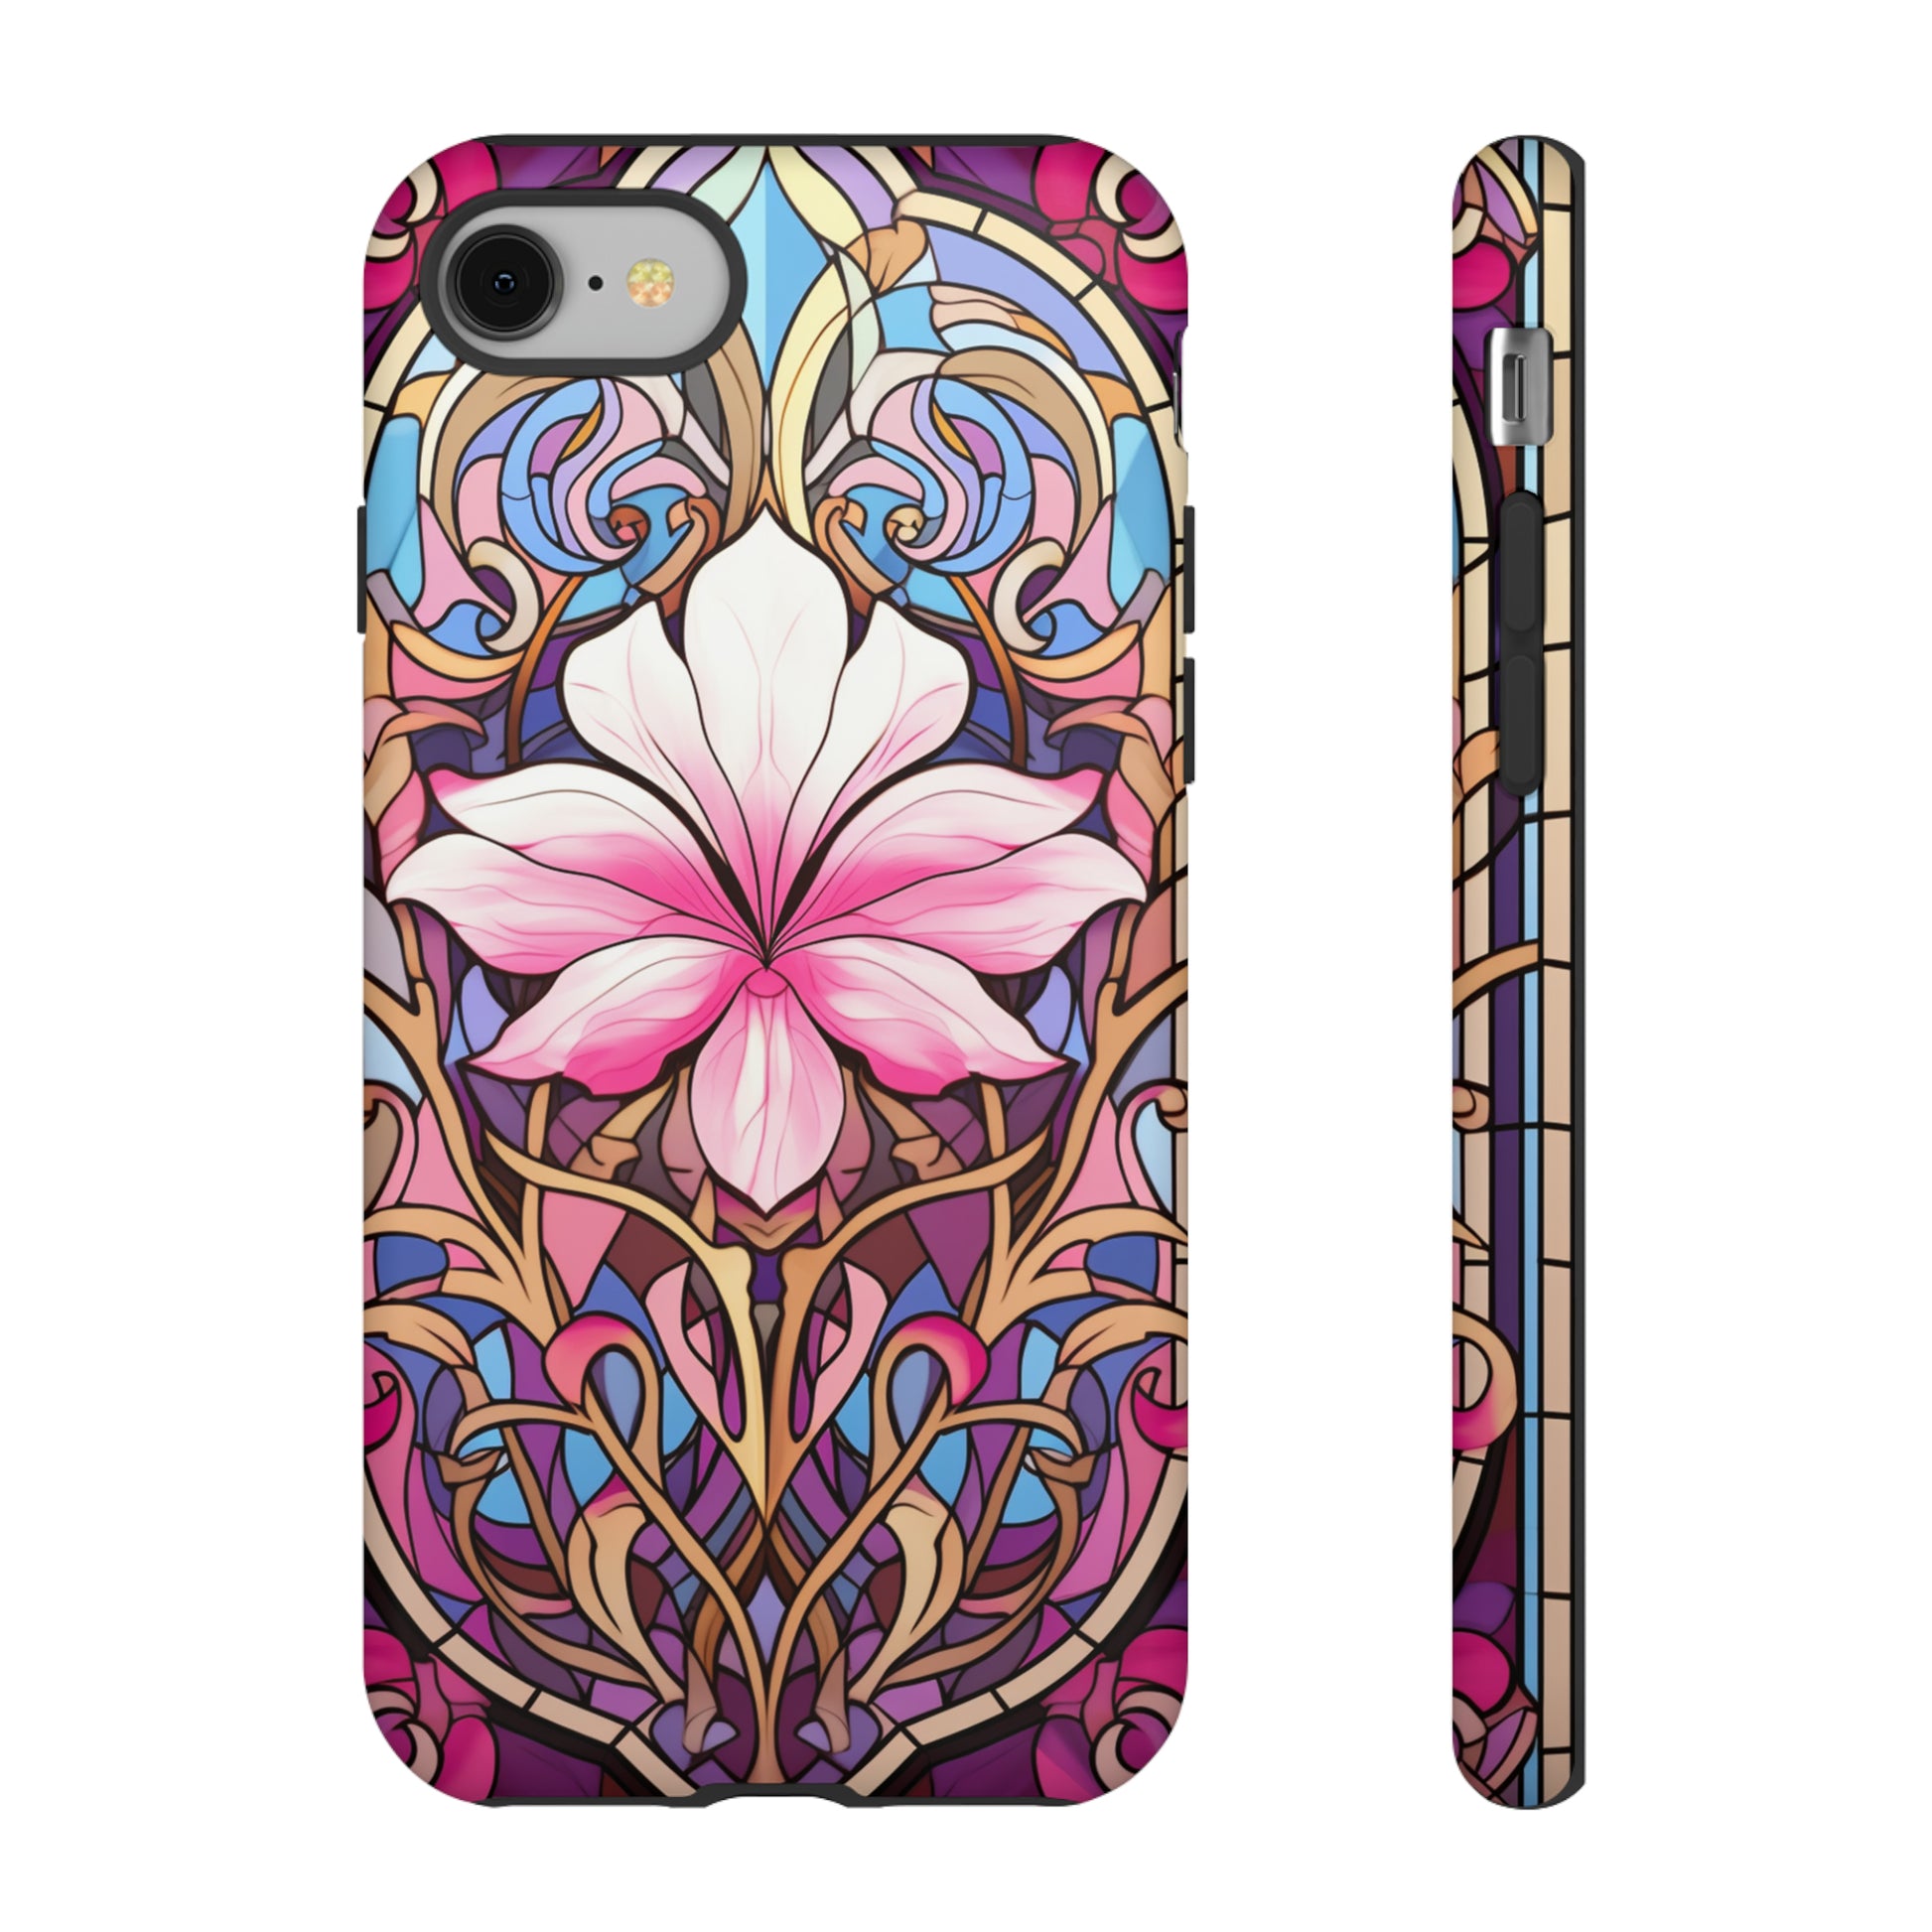 Sophisticated floral design case for iPhone XS Max